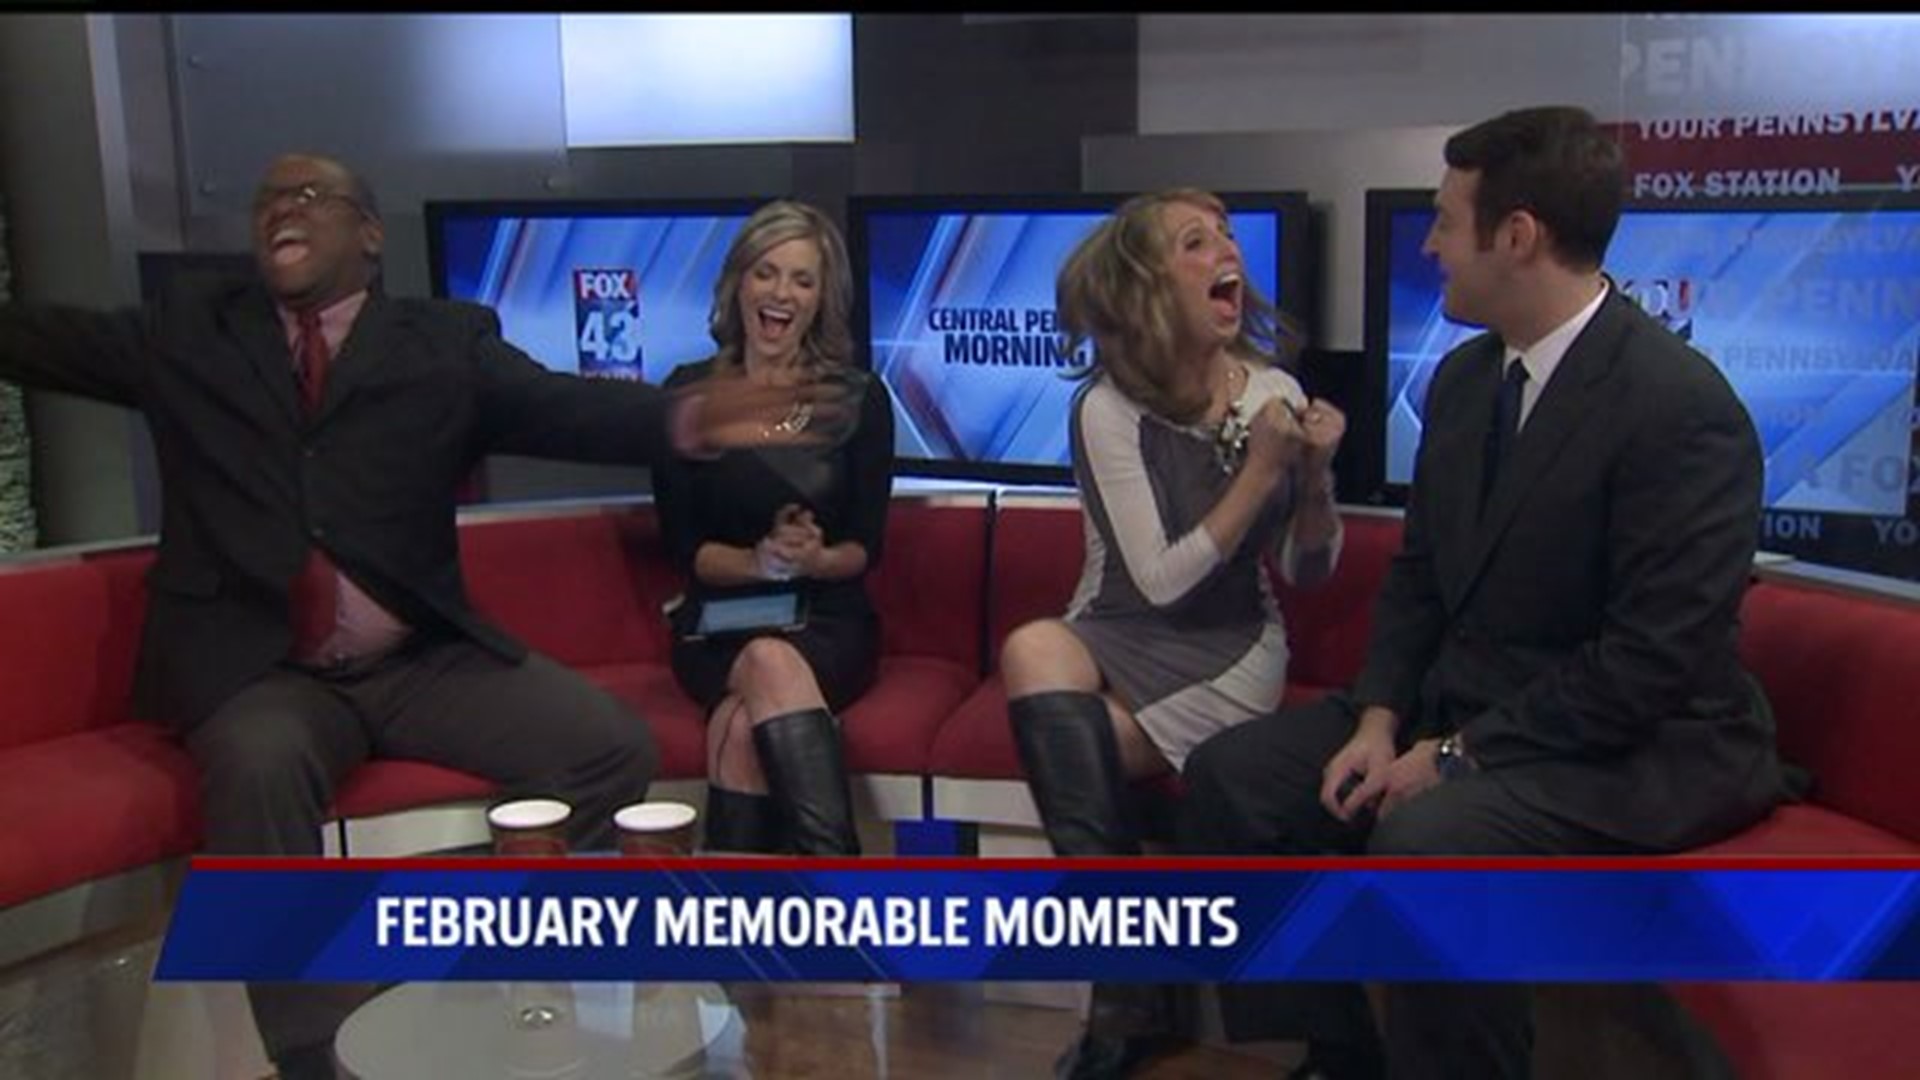 VIDEO: Memorable Moments from FOX43 Morning News February 2015